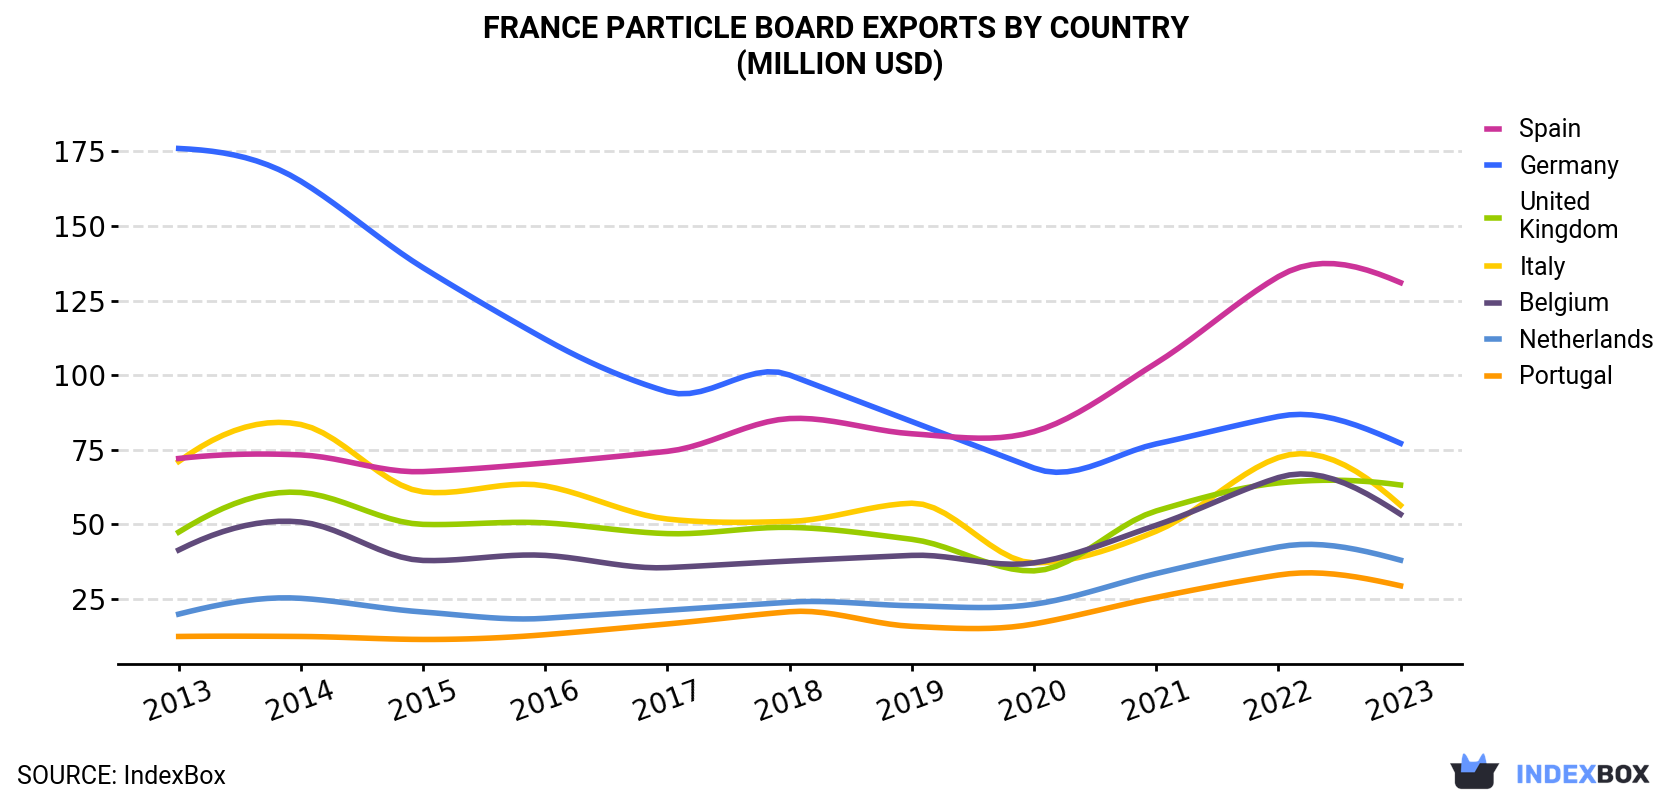 France Particle Board Exports By Country (Million USD)